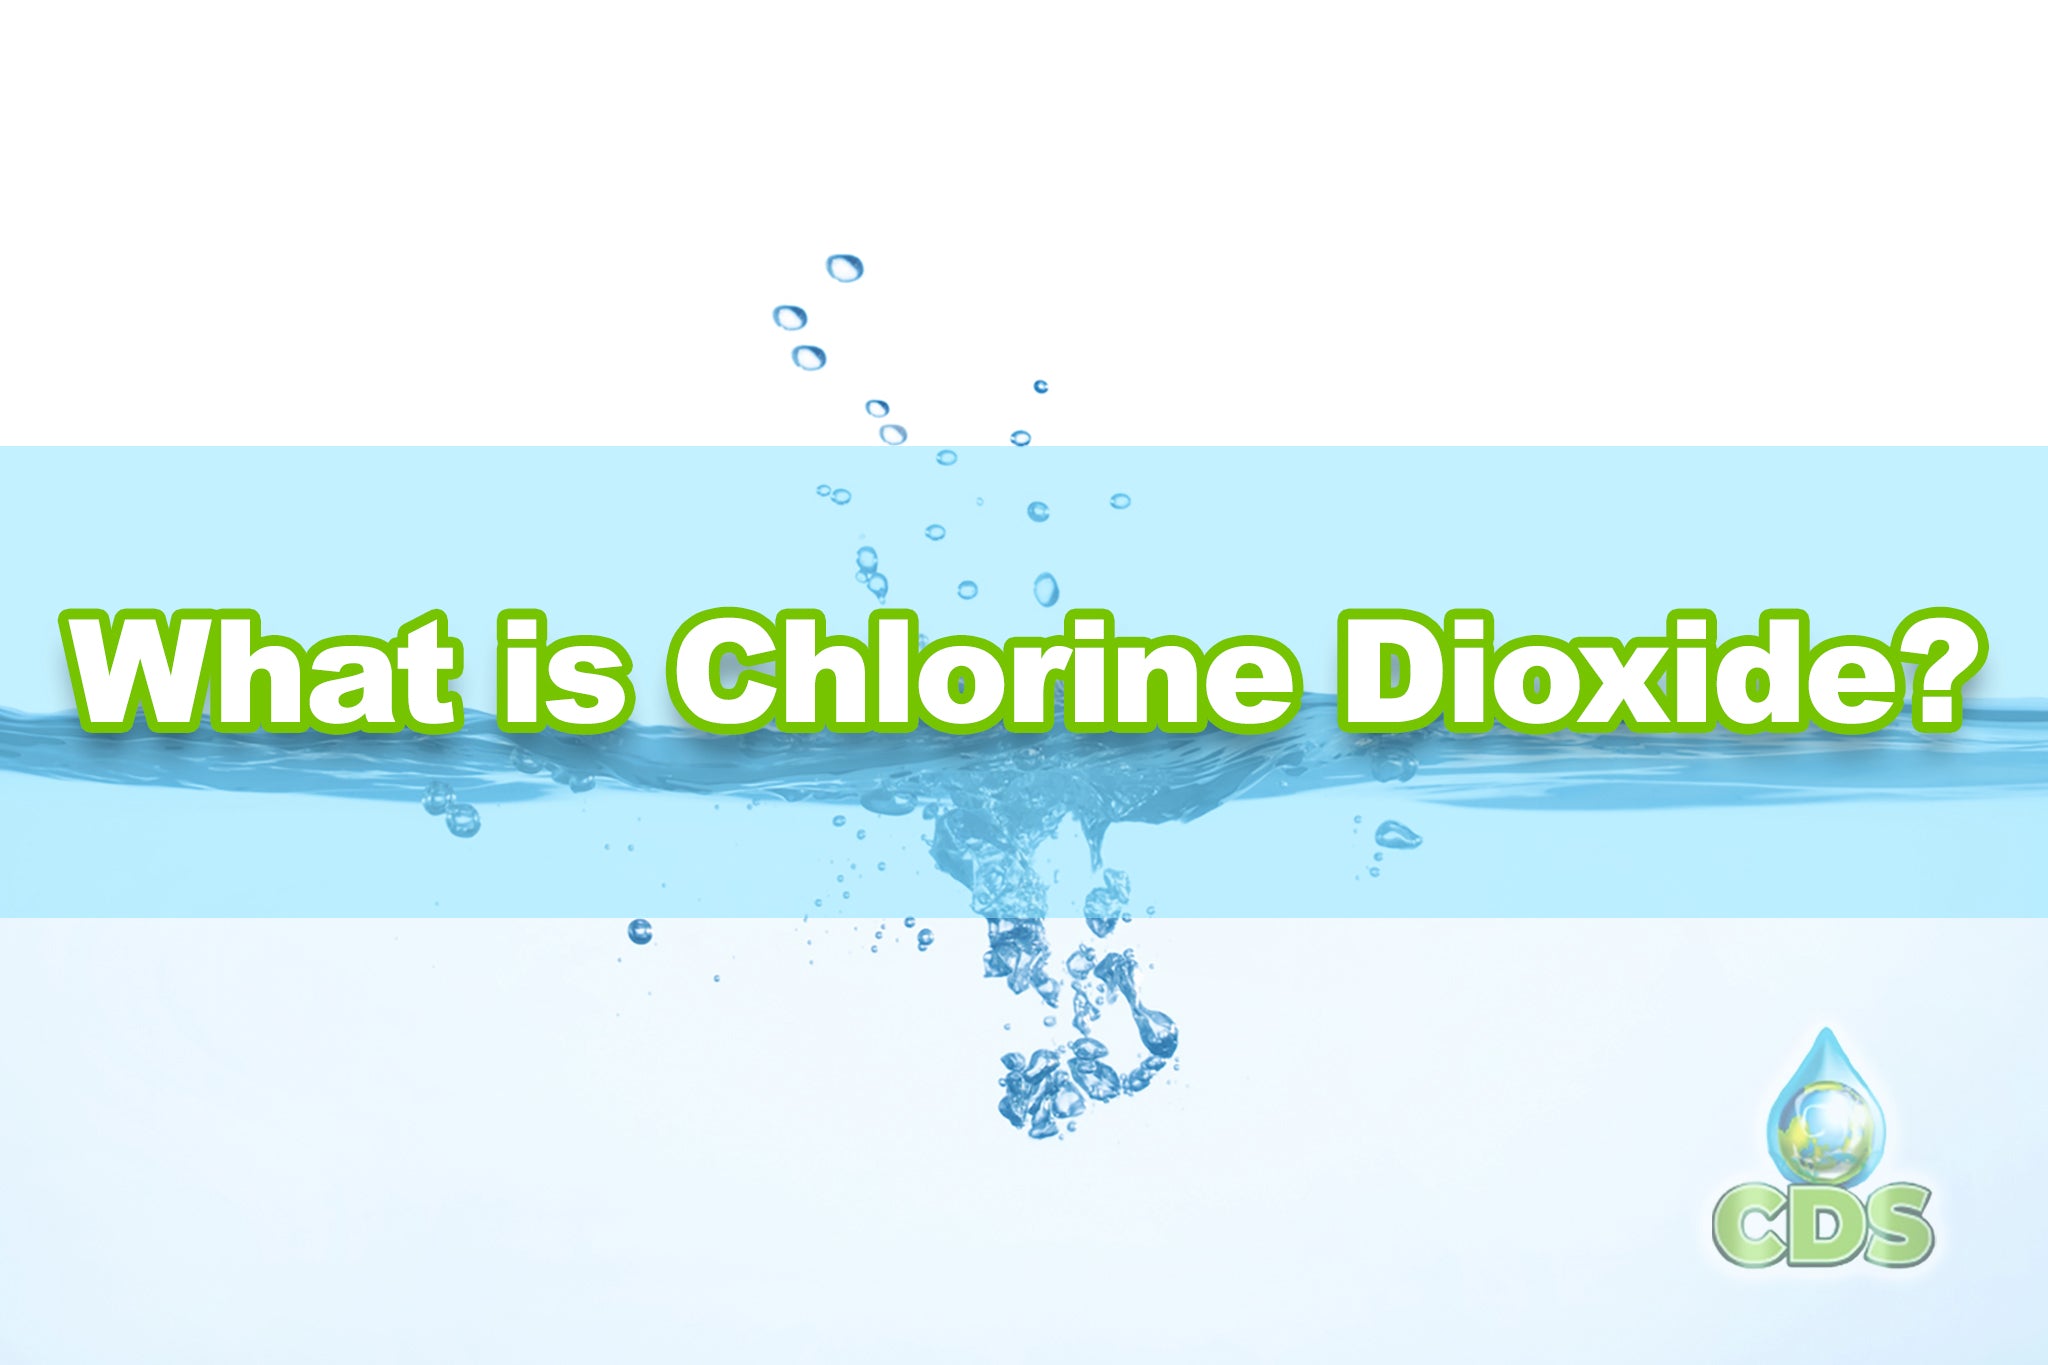 What is Chlorine Dioxide?